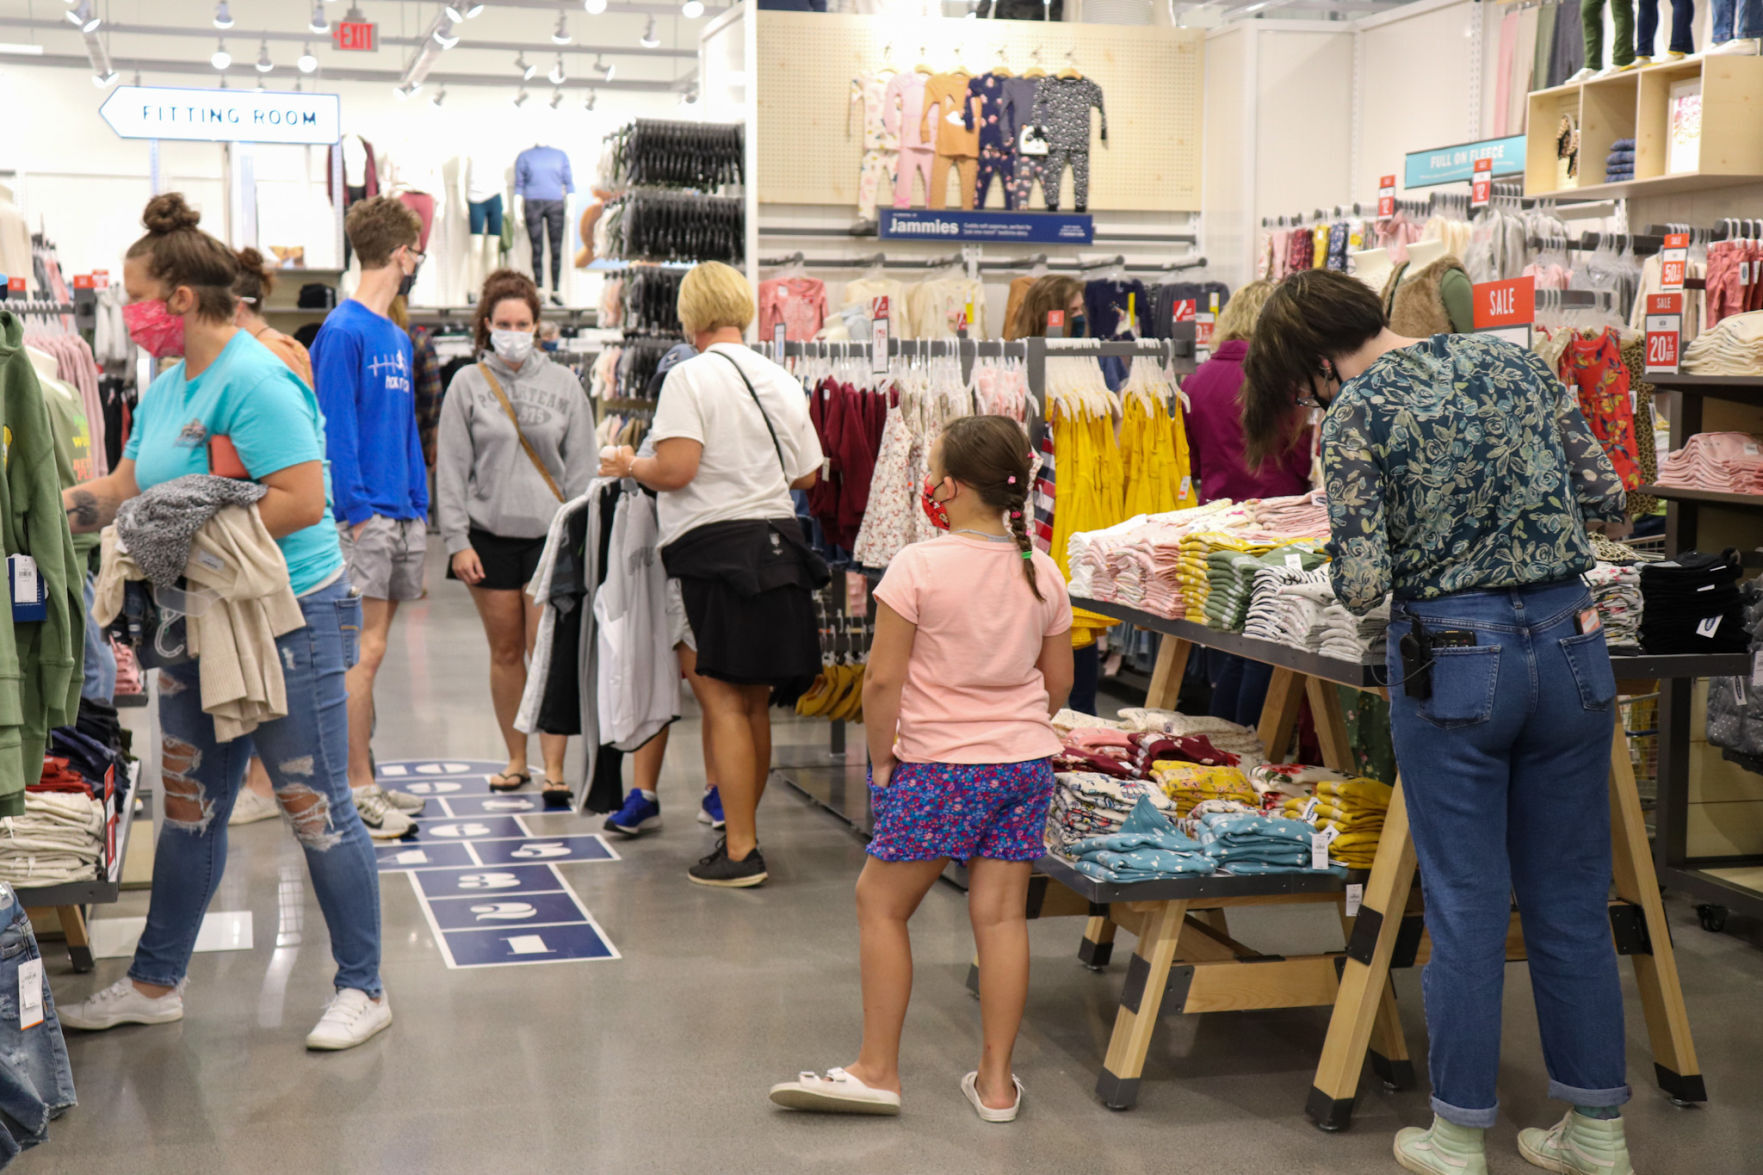 Clothing retailer Old Navy opens in 